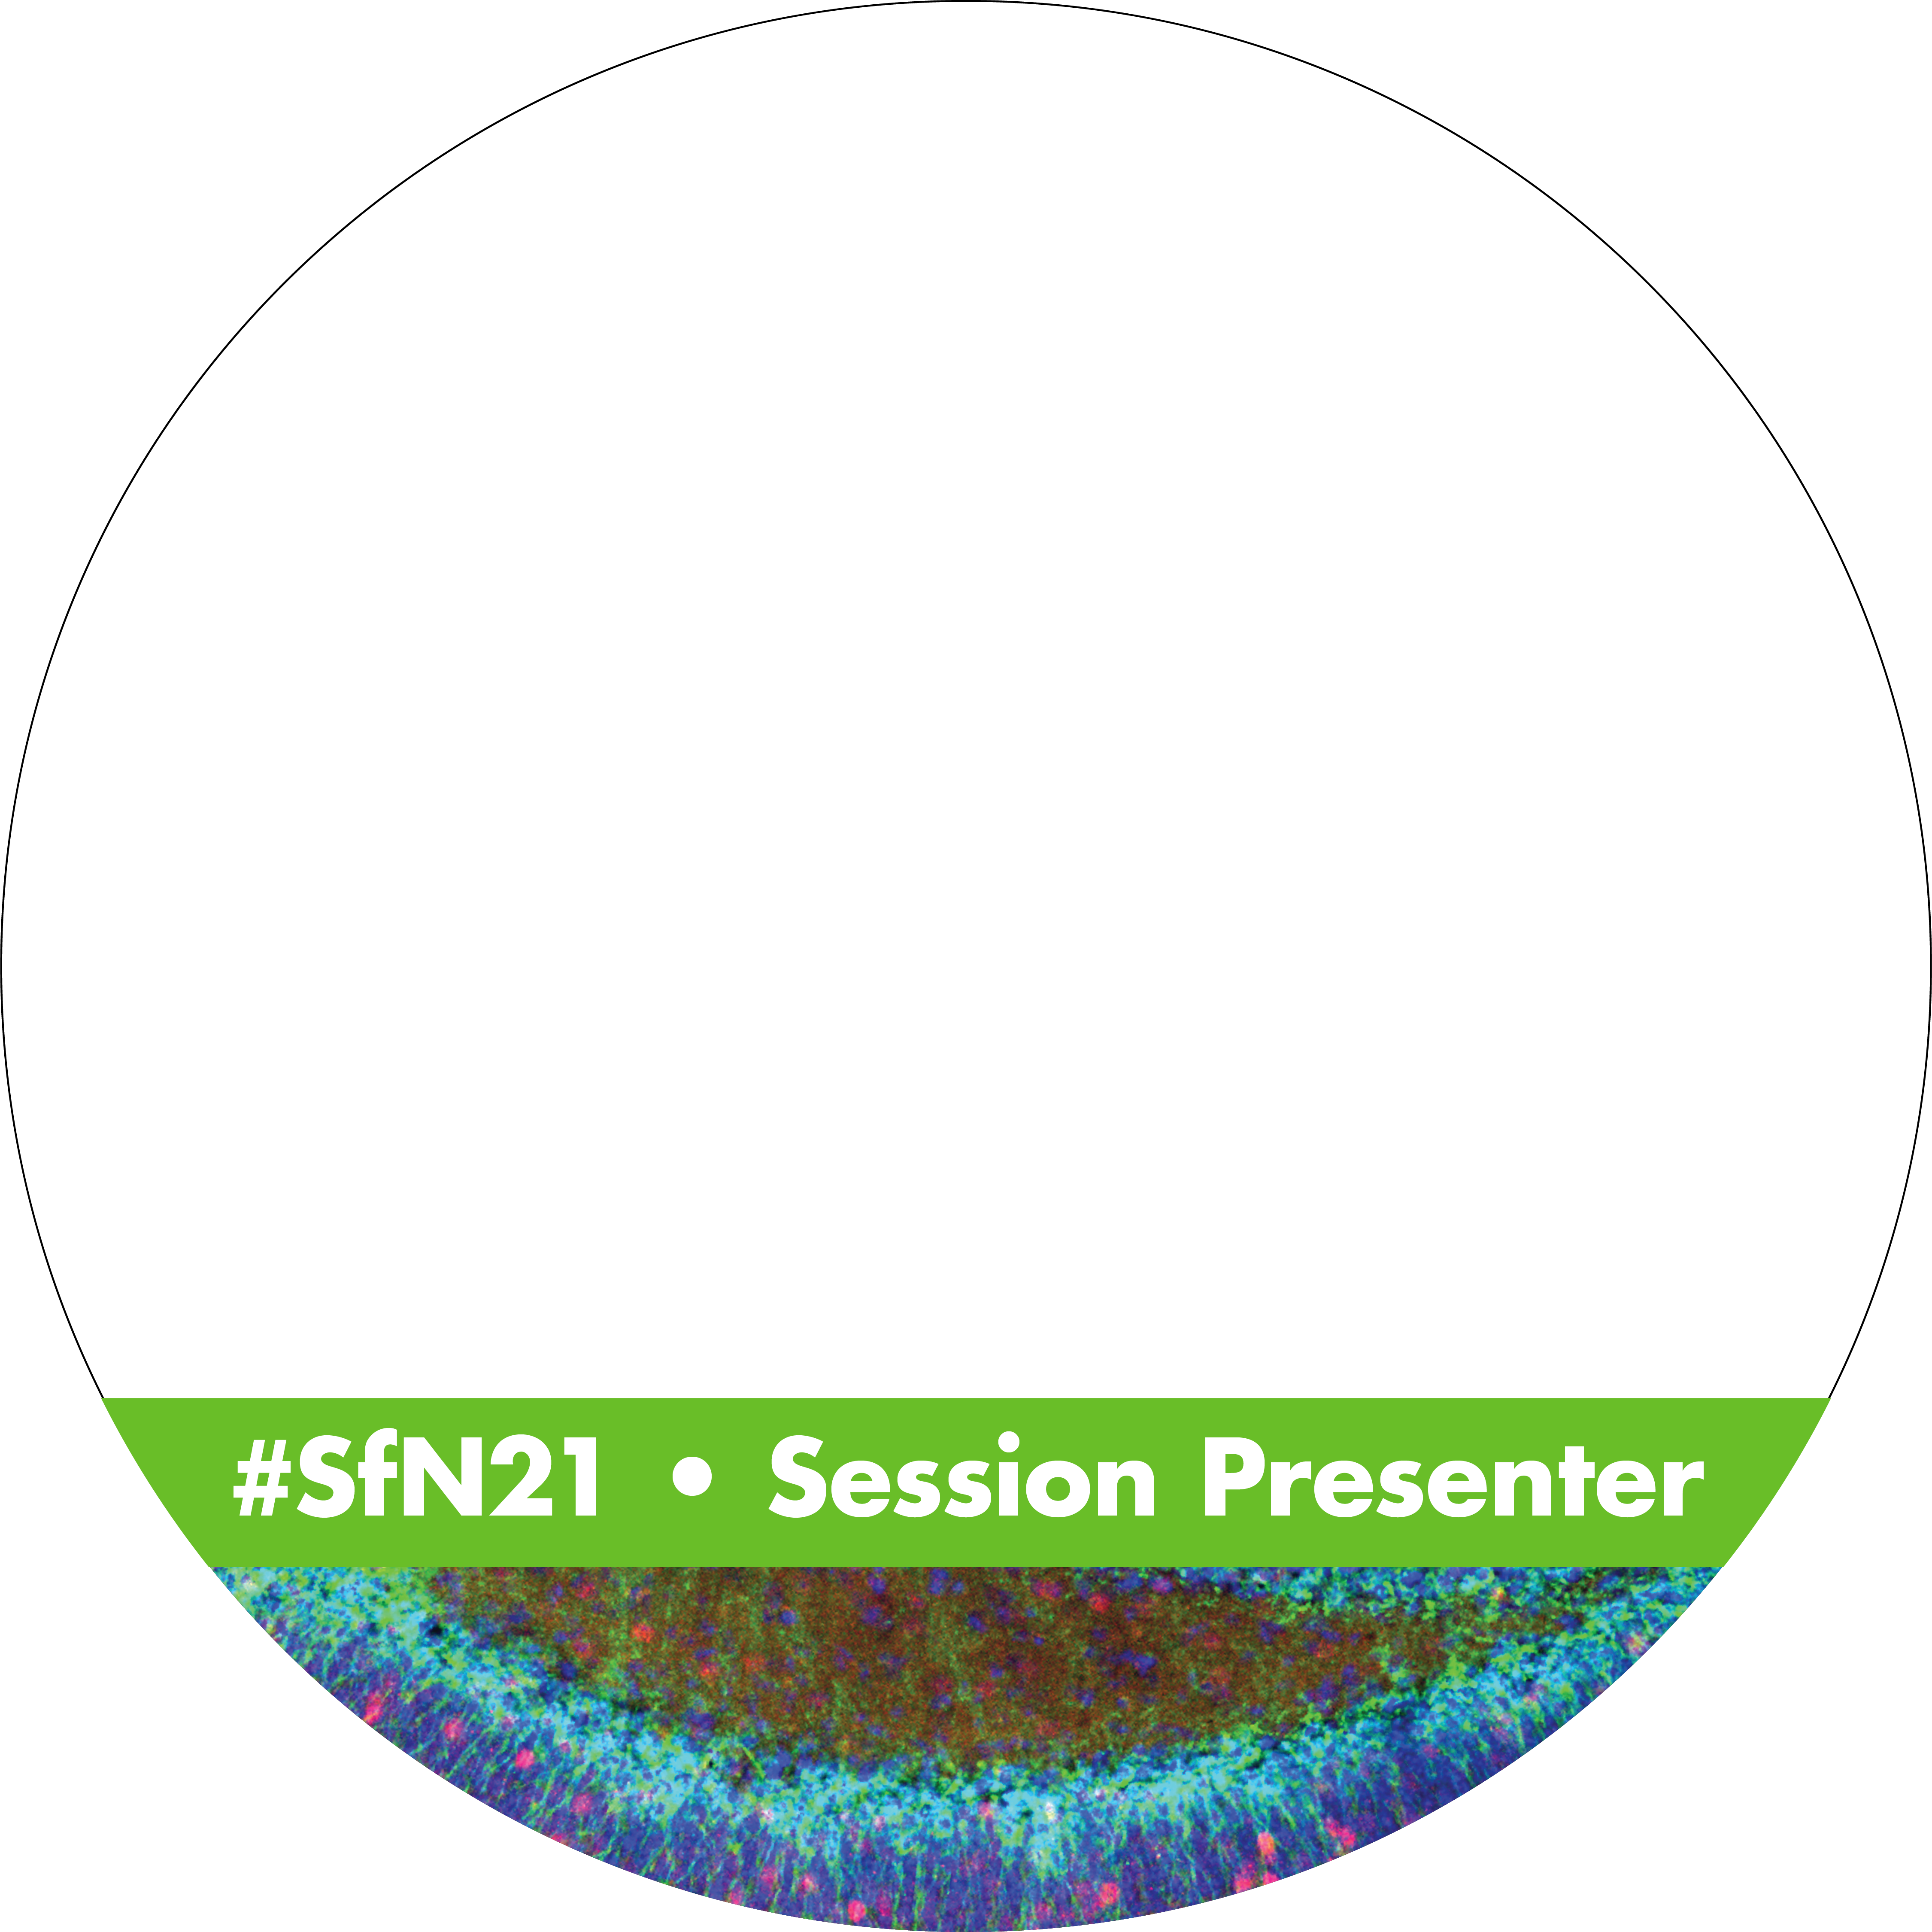 Neuroscience 2021 Profile Cover Image for Session Presenters